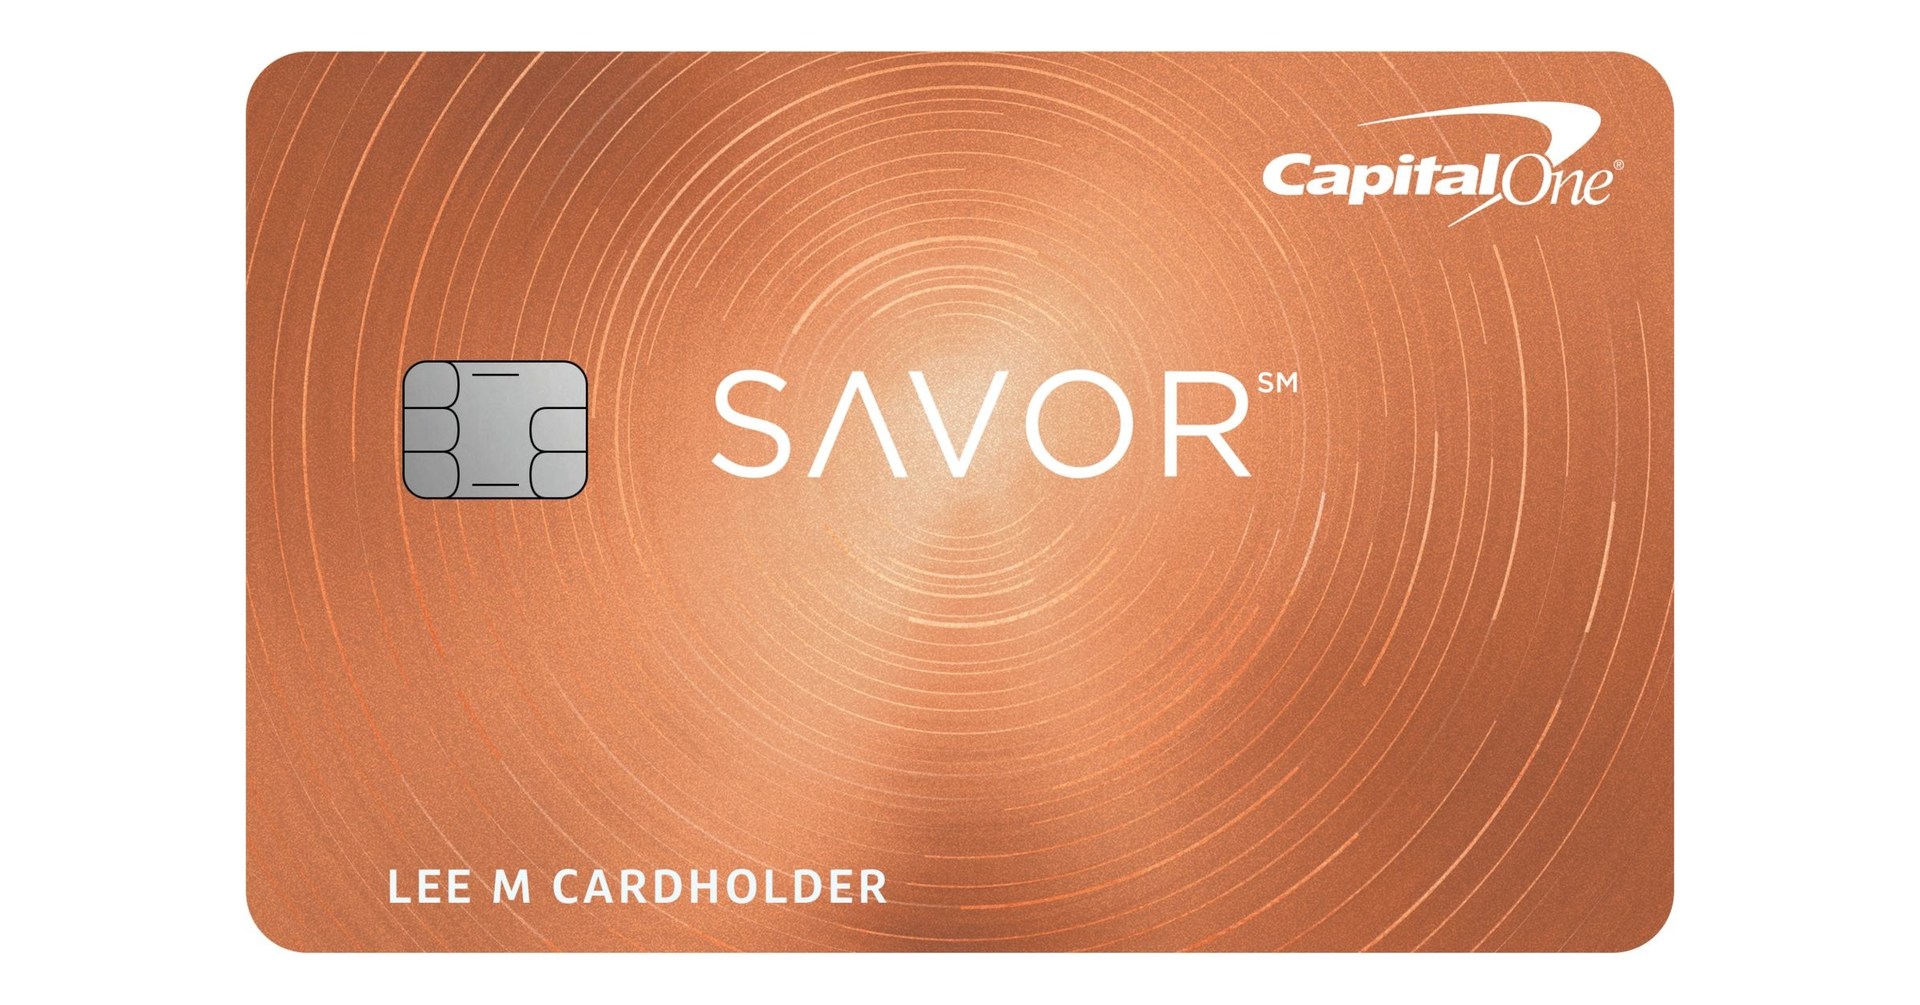 capital-one-introduces-the-newest-savor-card-a-cash-back-card-that